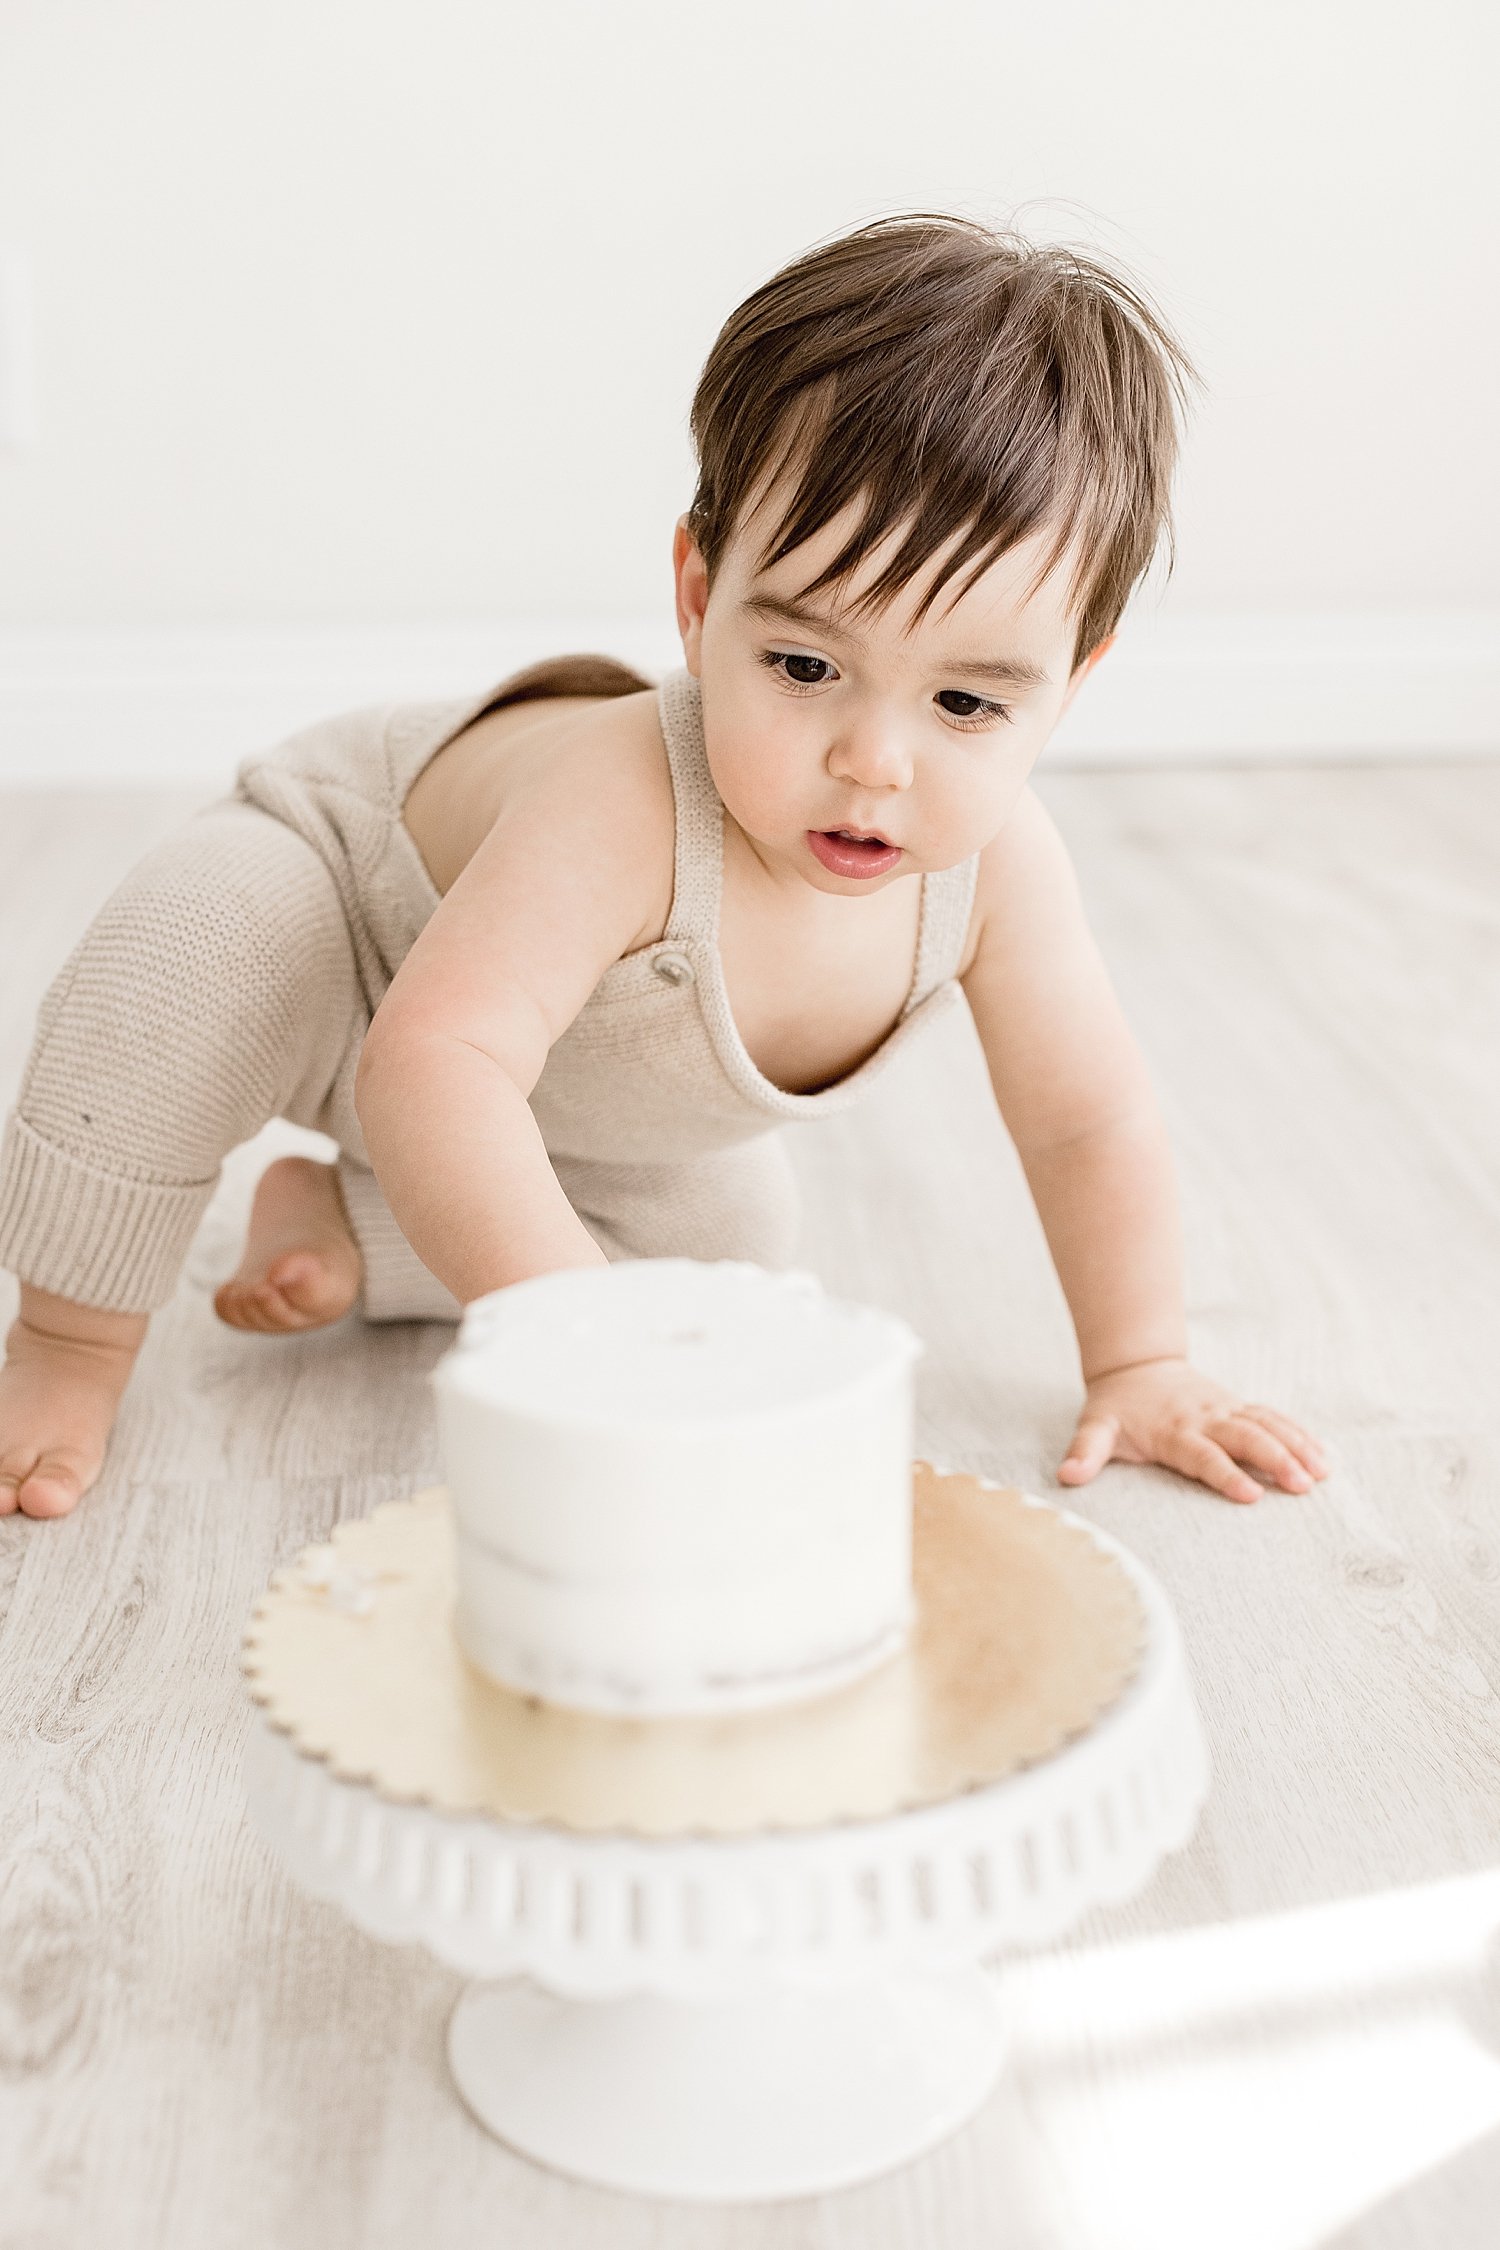 Cake smash session in Newport Beach studio for one year old with Ambre Williams Photography.